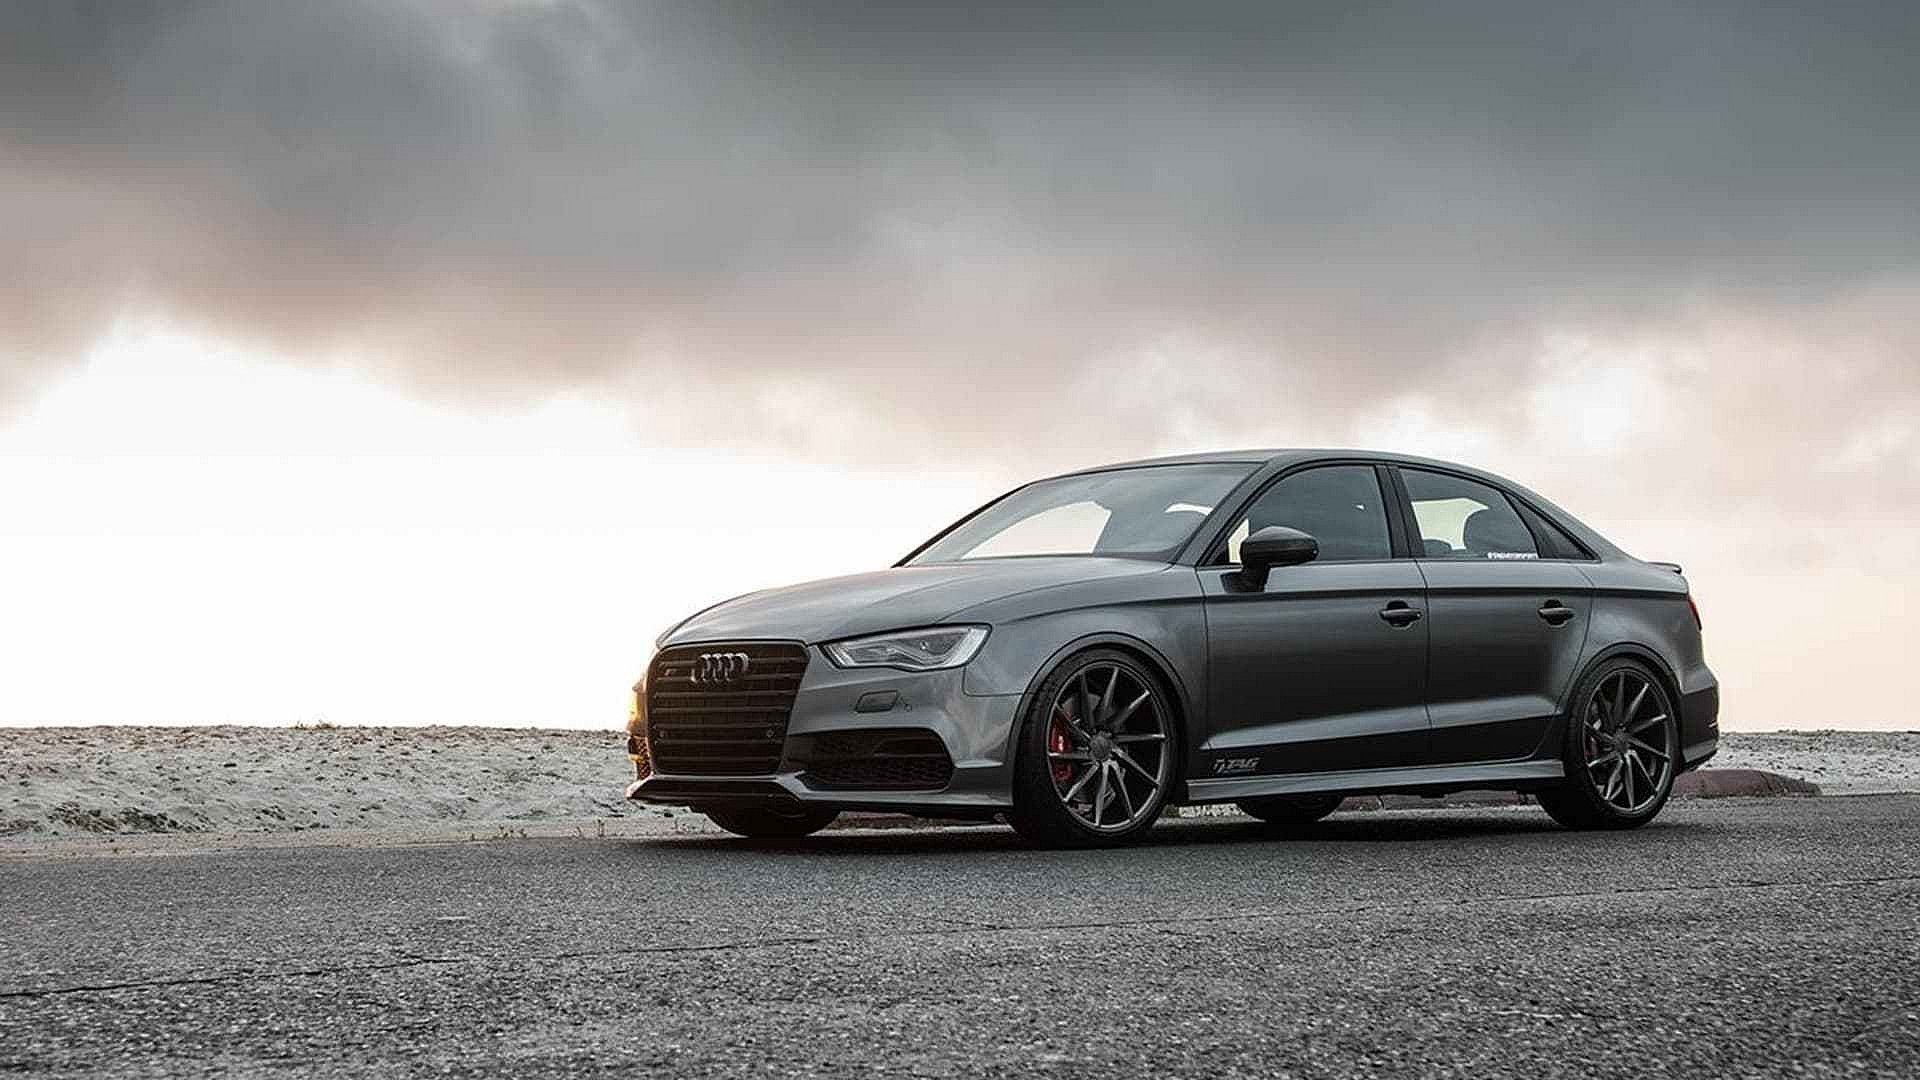 Free Download Tag For Audi Rs3 Desktop Wallpaper 2016 4k Wide S6 Cityconnectapps 1920x1080 For Your Desktop Mobile Tablet Explore 43 Audi Rs3 Wallpaper Audi Rs3 Wallpaper Audi Rs3 Sportback Wallpapers Audi